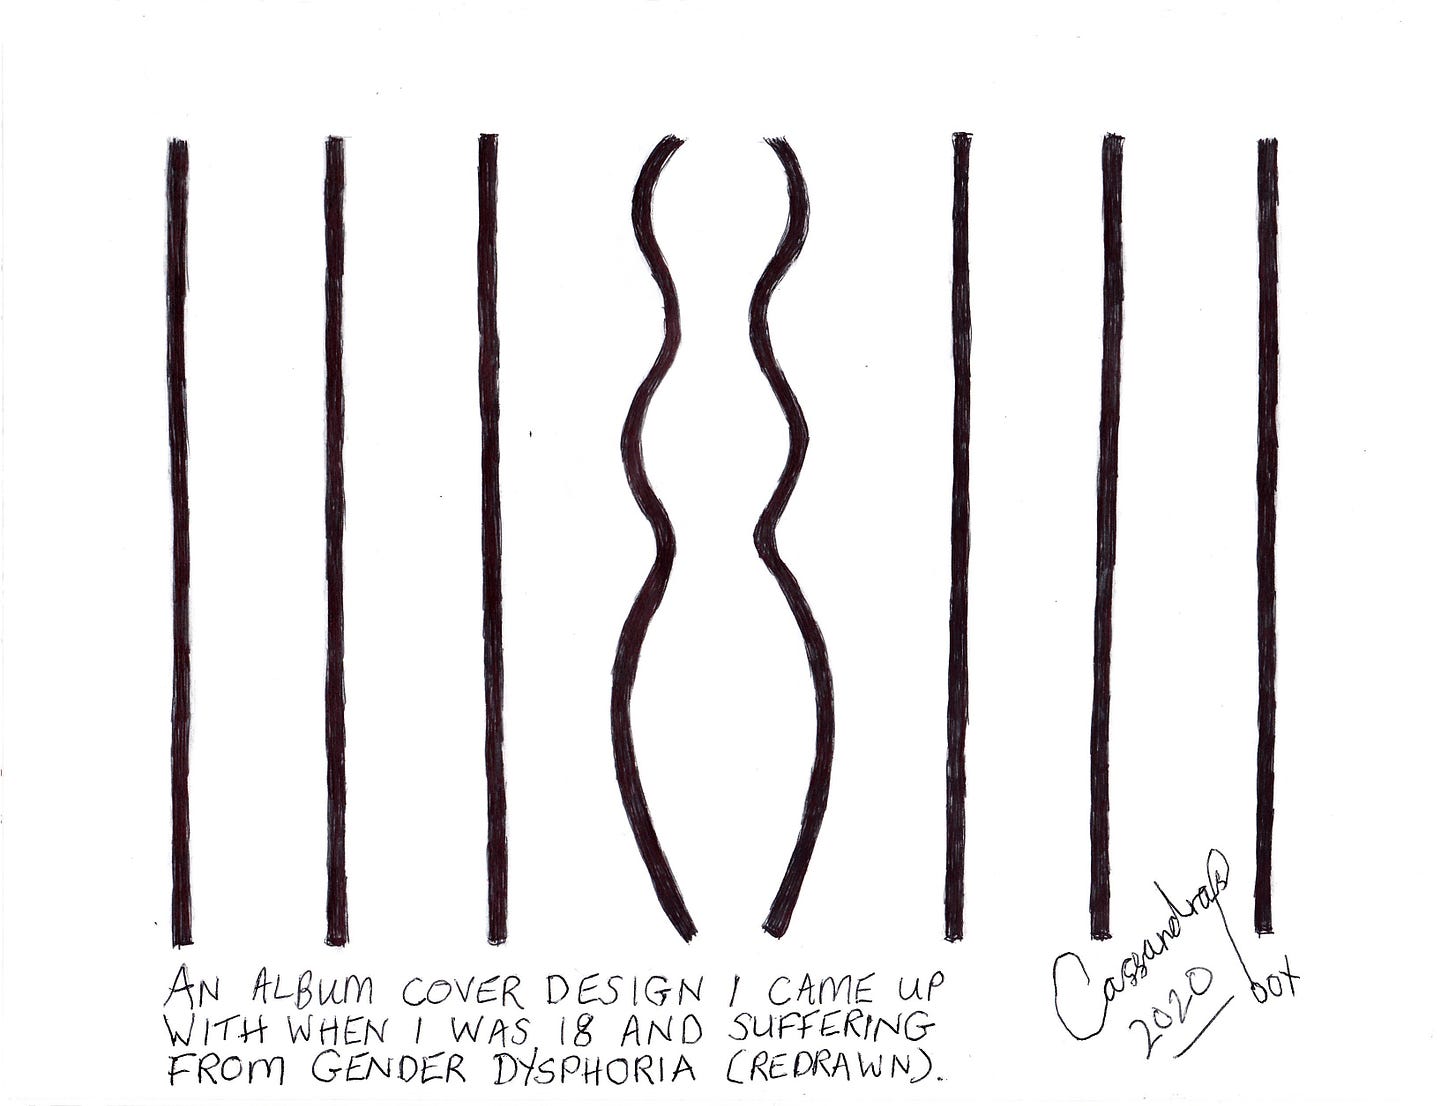 Cartoon showing prison bars with two bent to form a female silhouette, text reads An album cover design I came up with when I was eighteen suffering from gender dysphoria (redrawn).